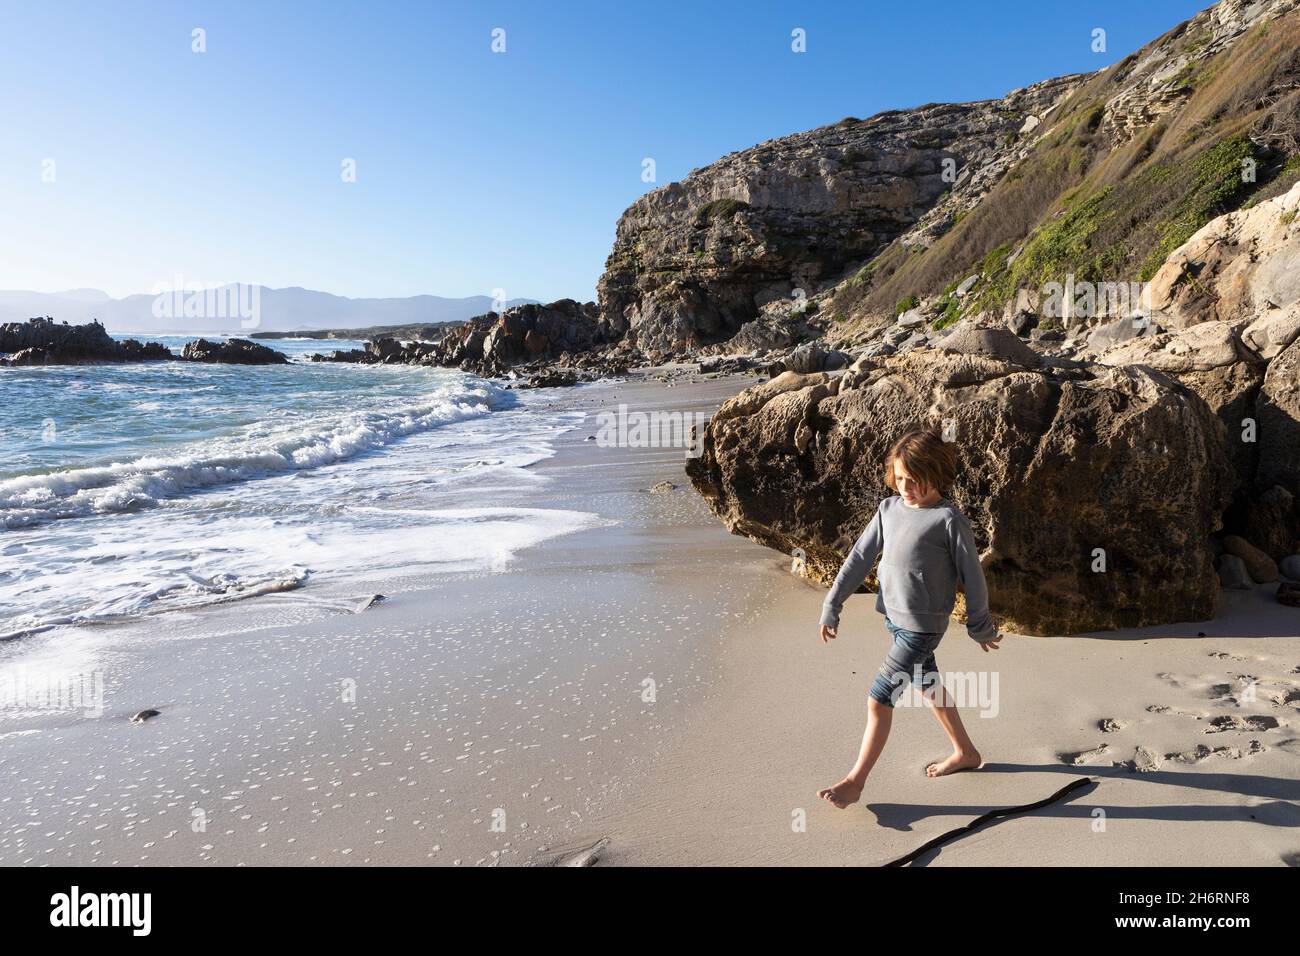 A young boy alone on a small stretch of sand under the cliffs by the ocean. Stock Photo